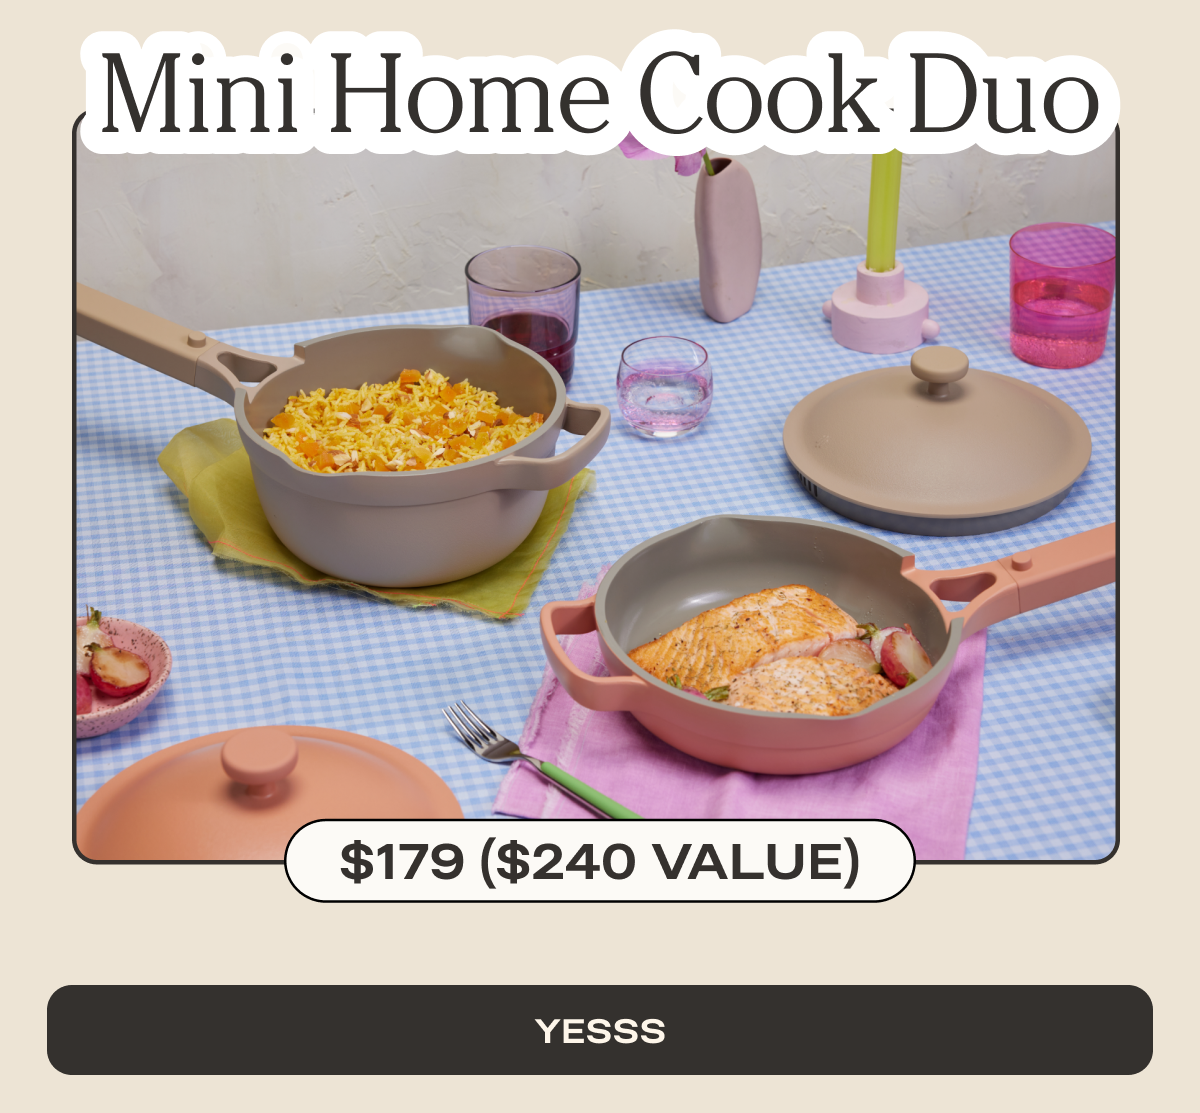 Mini Home Cook Duo - Yesss